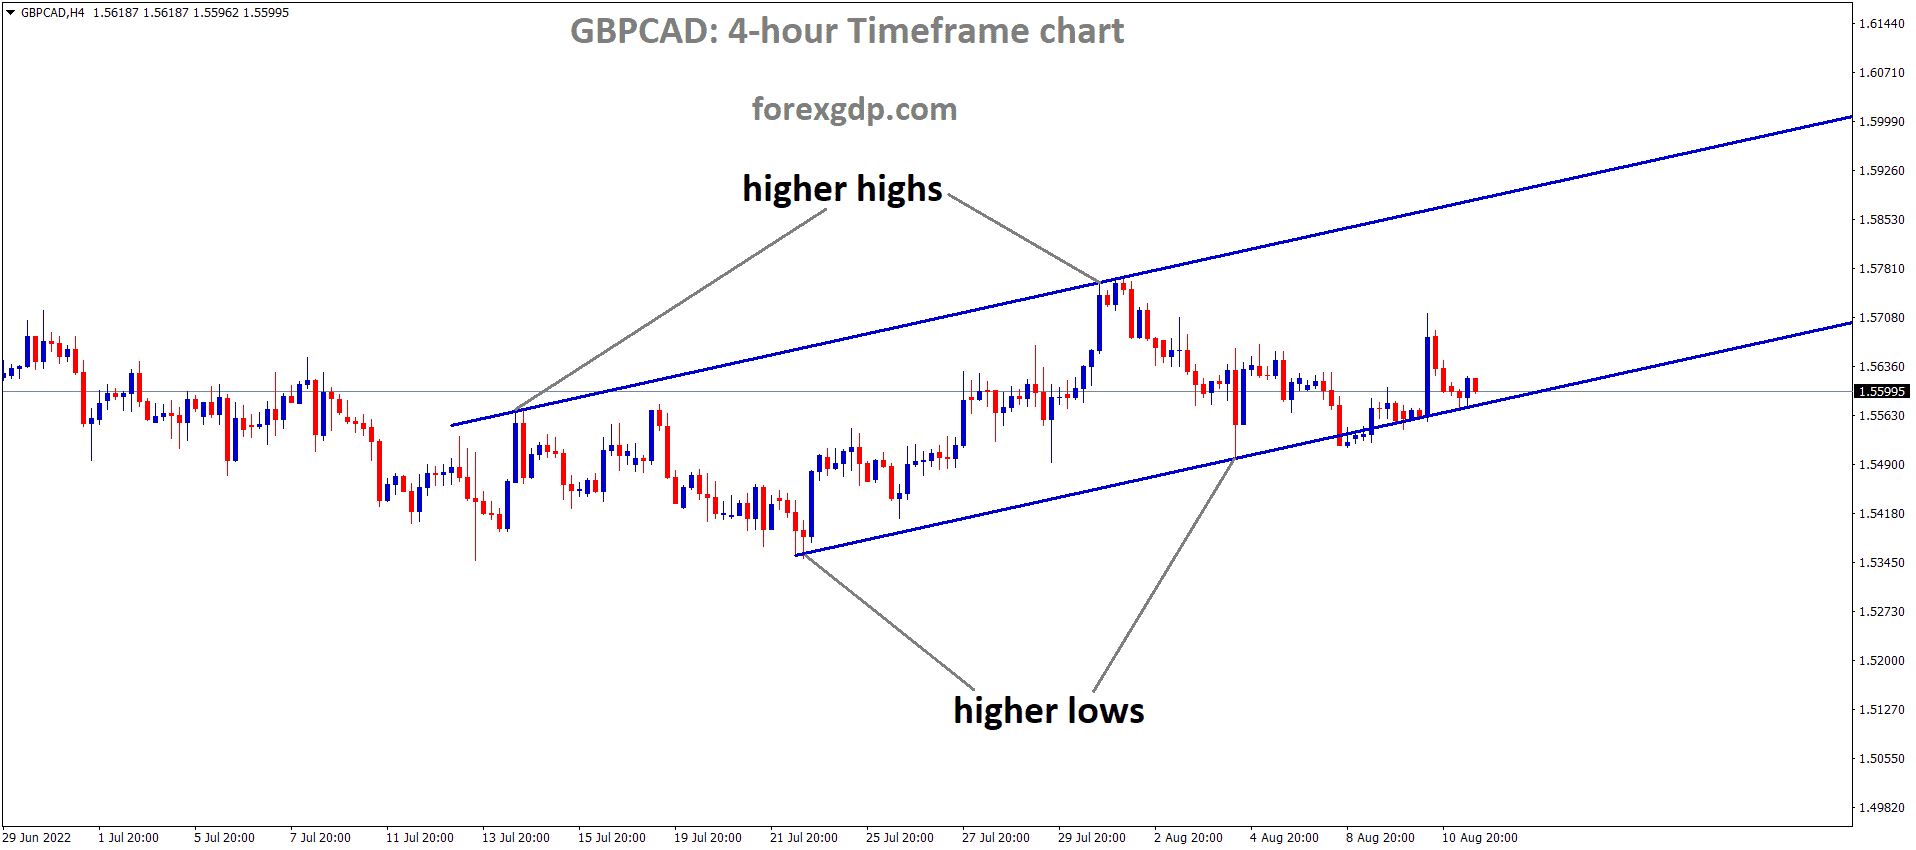 GBPCAD is moving in an Ascending channel and the Market has reached the higher low area of the channel 1